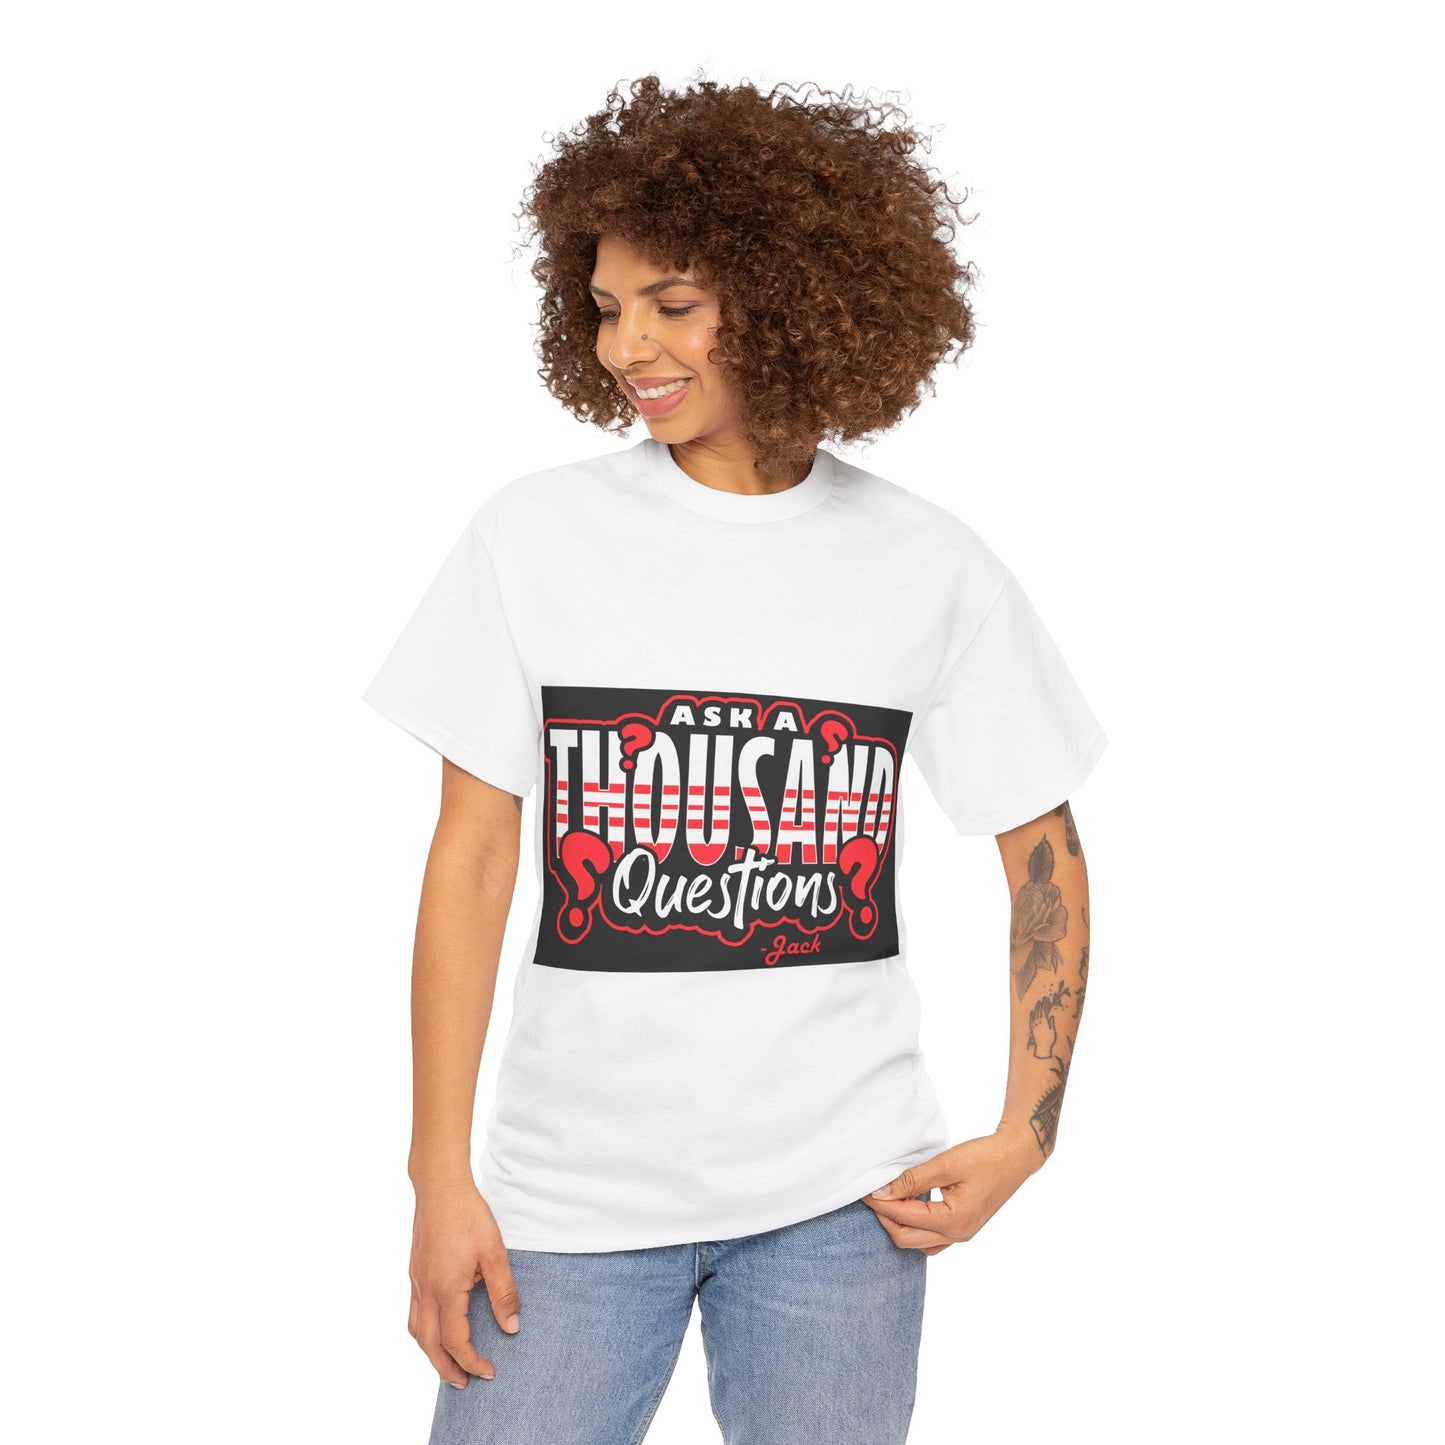 The Philosopher T-Shirt: Ask a thousand questions